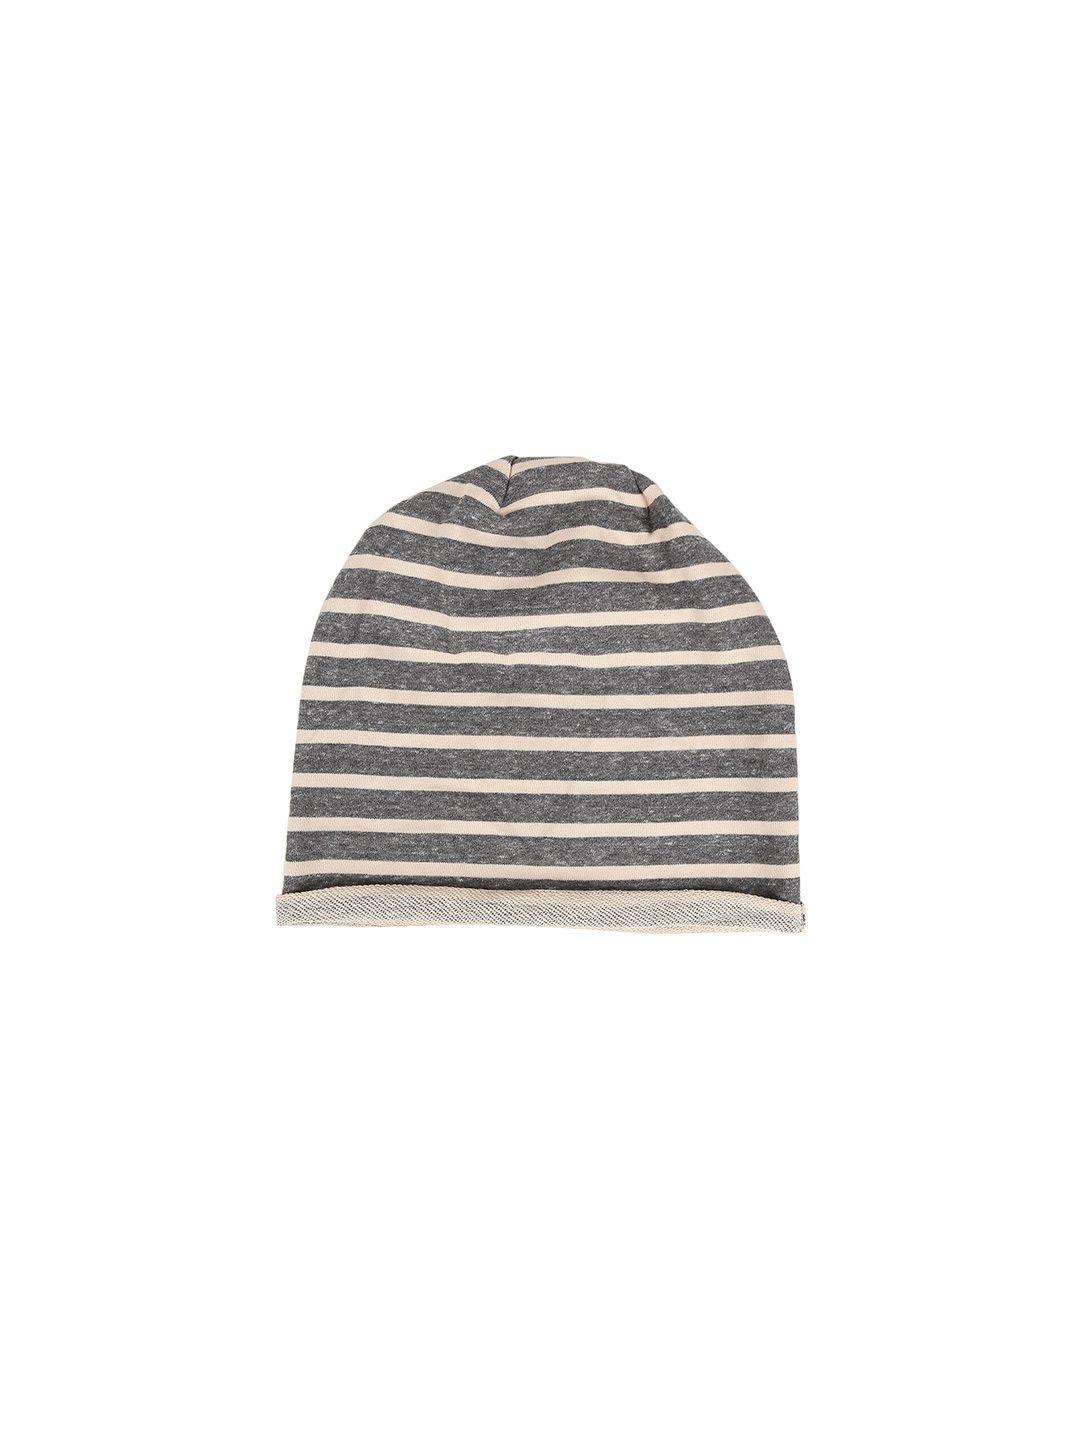 isweven unisex yellow & grey printed beanie